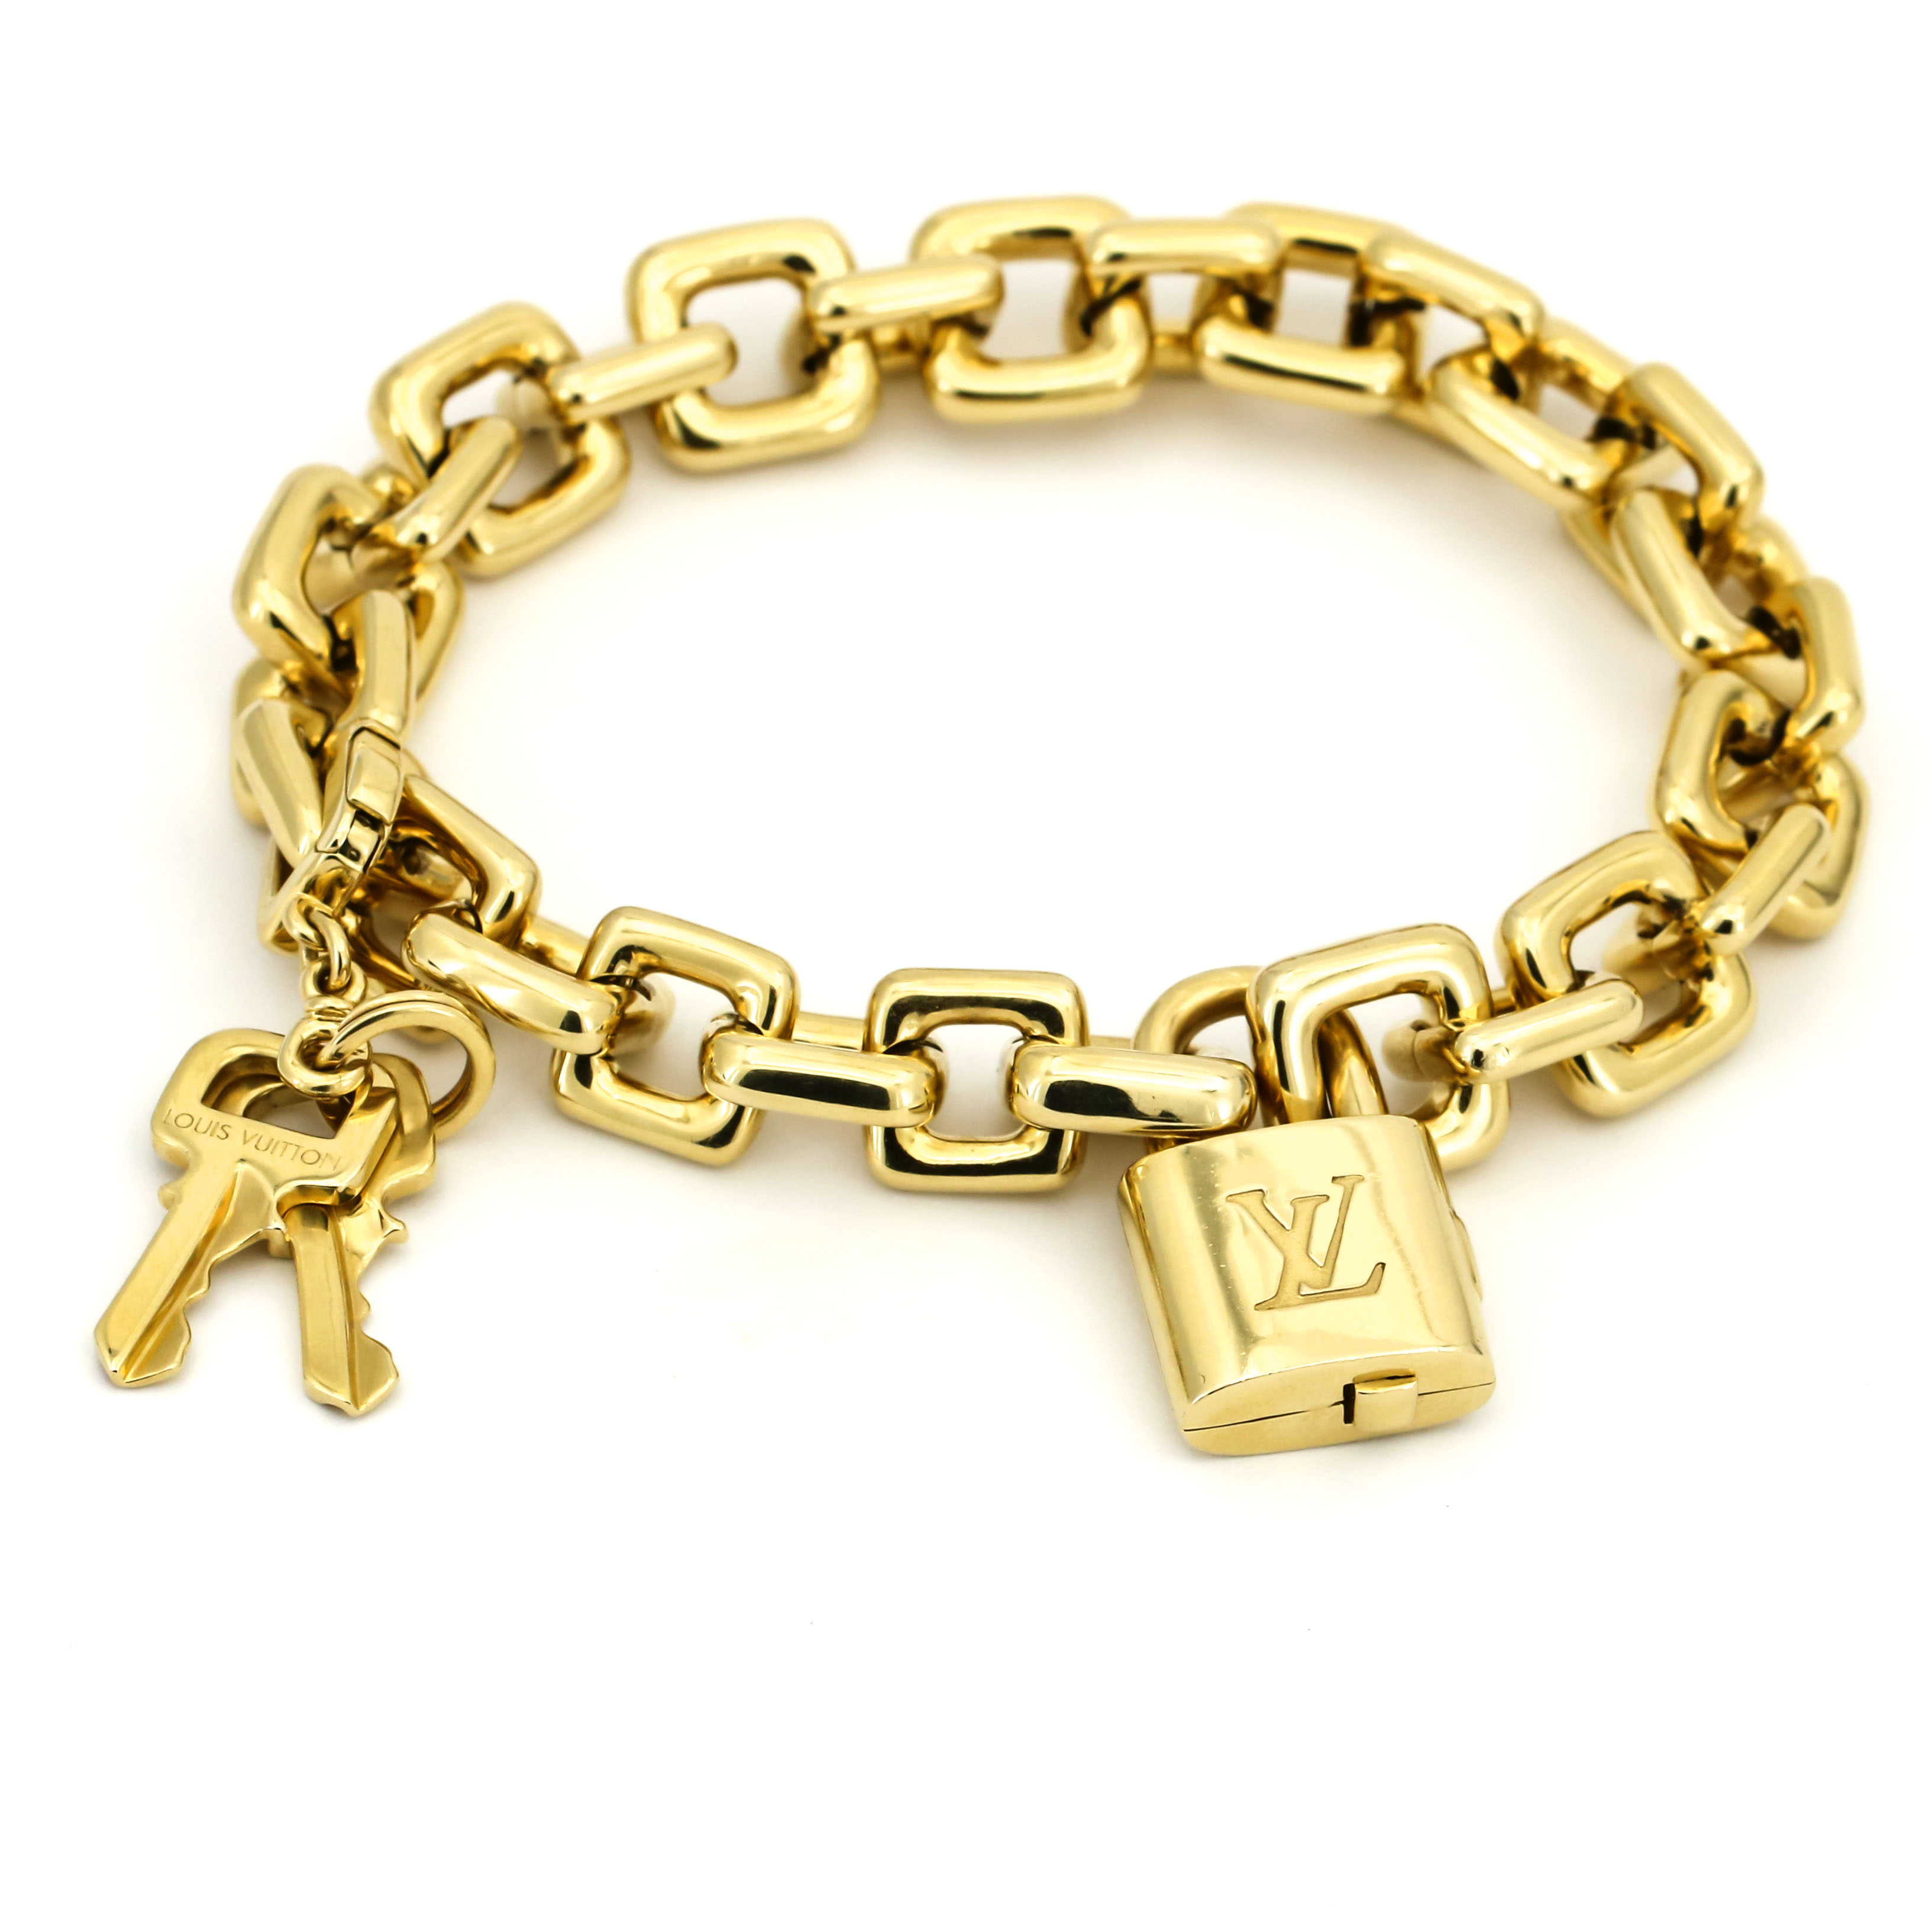 Louis Vuitton Padlock and Keys Charm Bracelet in 18k Yellow Gold with Box | eBay